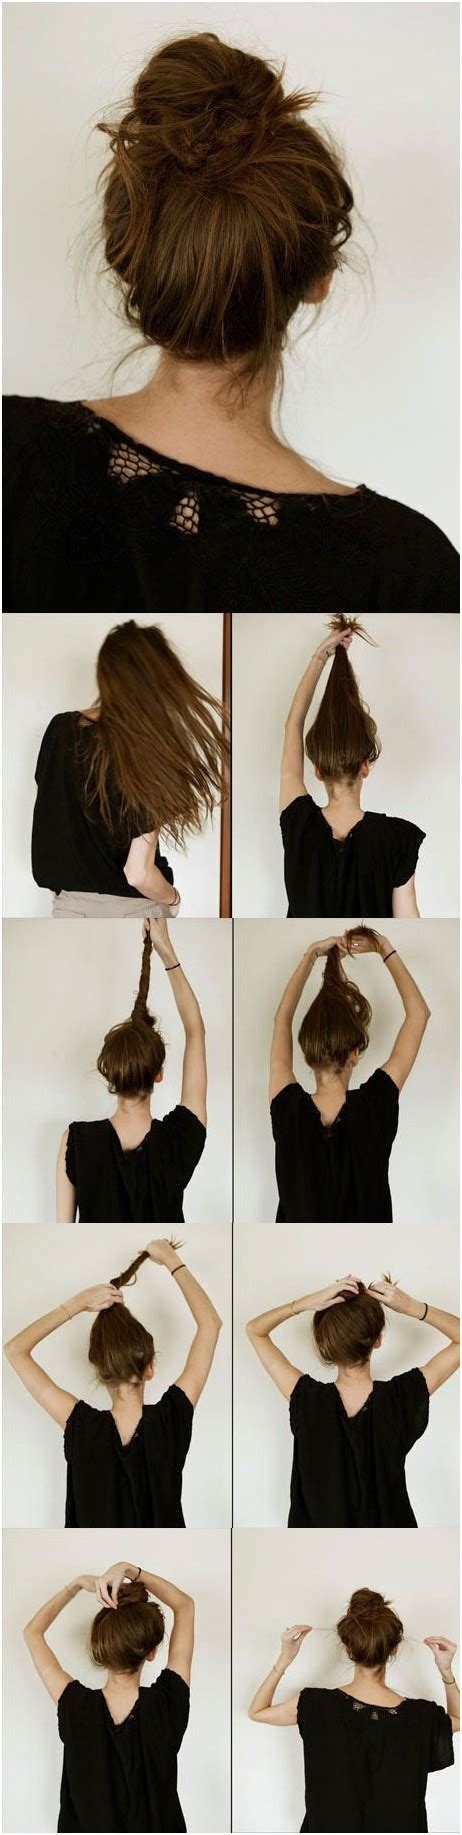 How to style messy bun for long hair. 11 Wonderful Everyday Hairstyles for Long Hair - Pretty ...